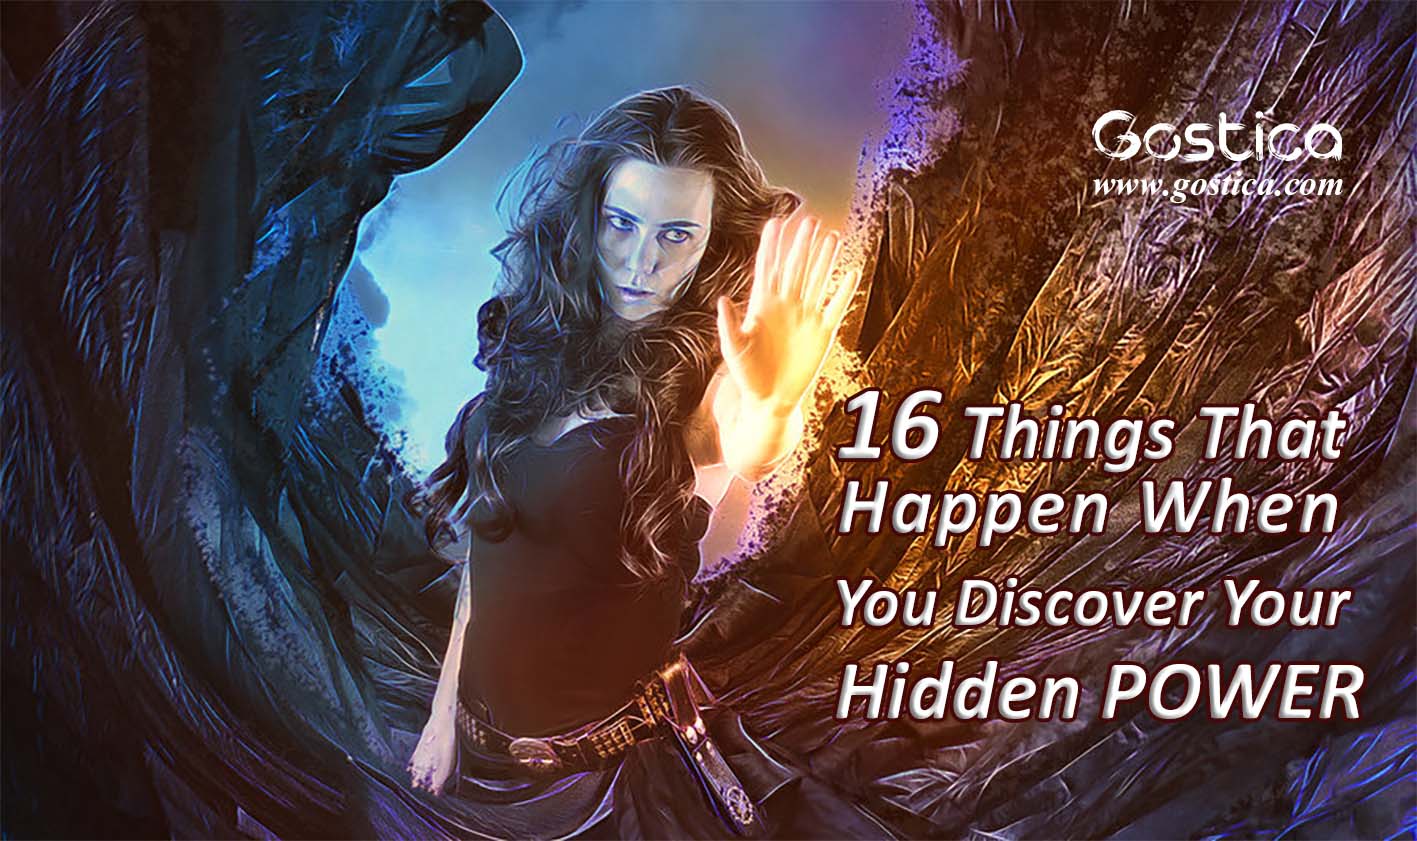 16-Things-That-Happen-When-You-Discover-Your-Hidden-Power.jpg